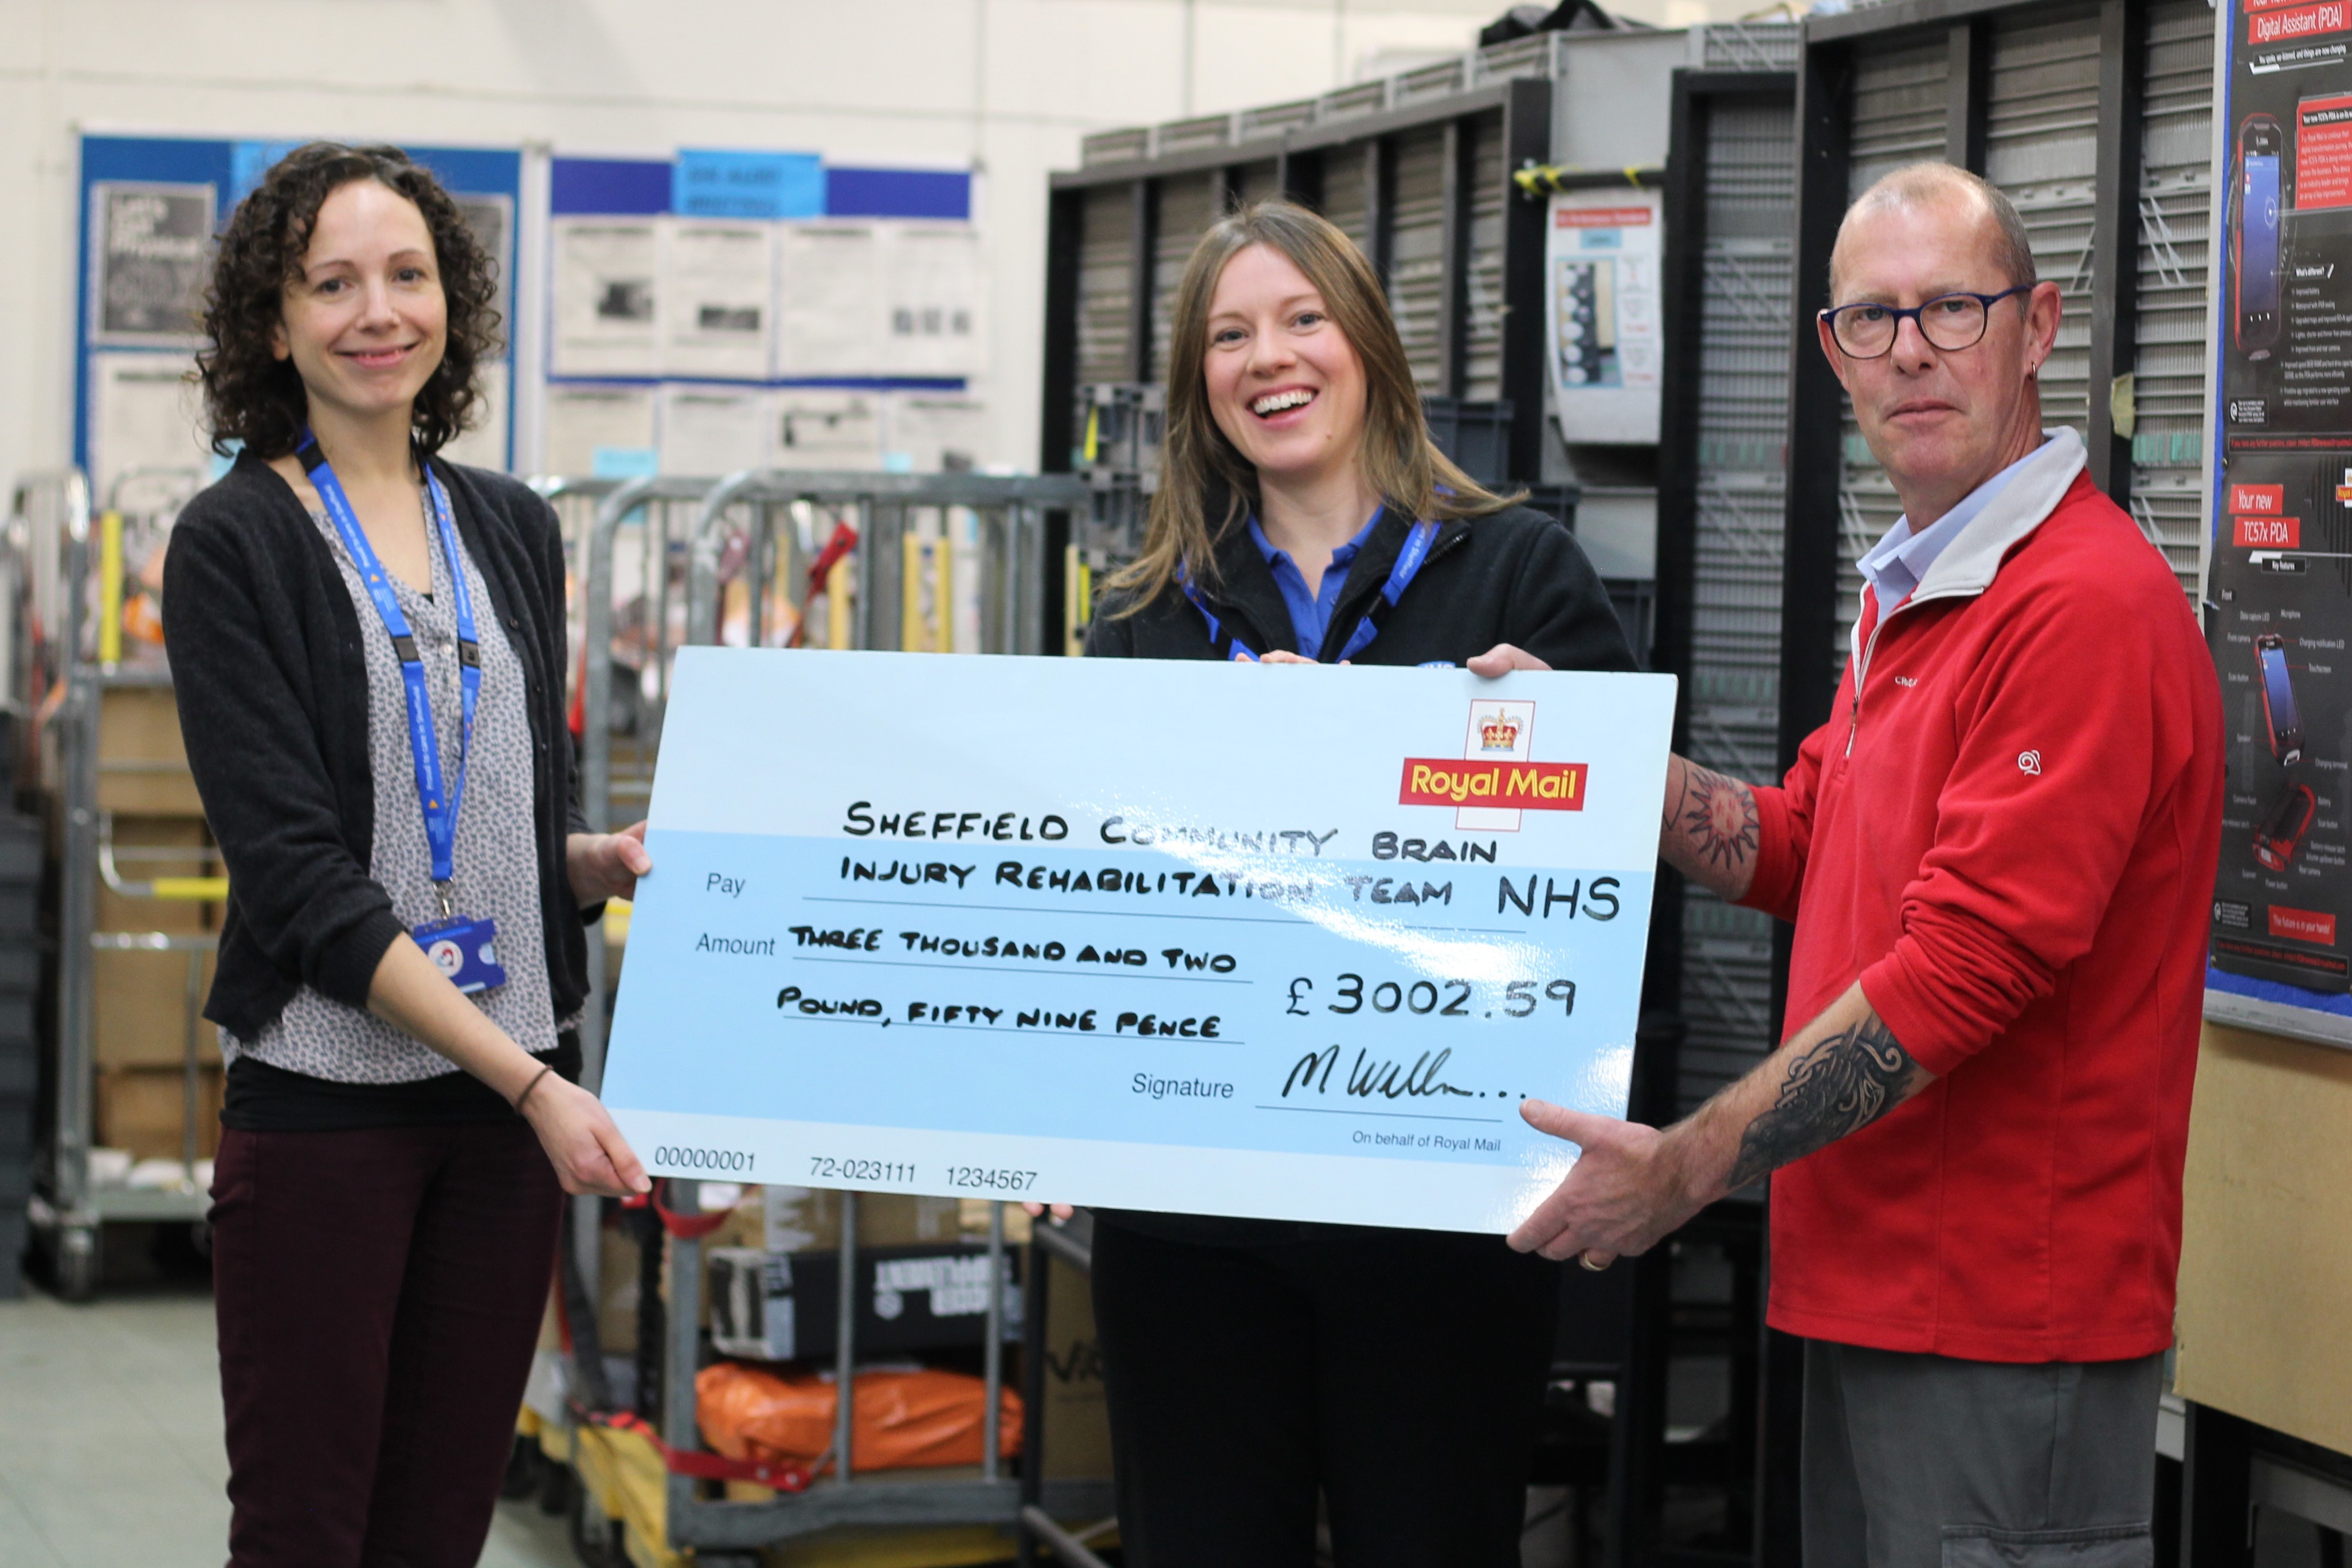 Sarah Morrey and Lucy Needham from SCBIRT receive the cheque from Iain Barker in front of his colleagues